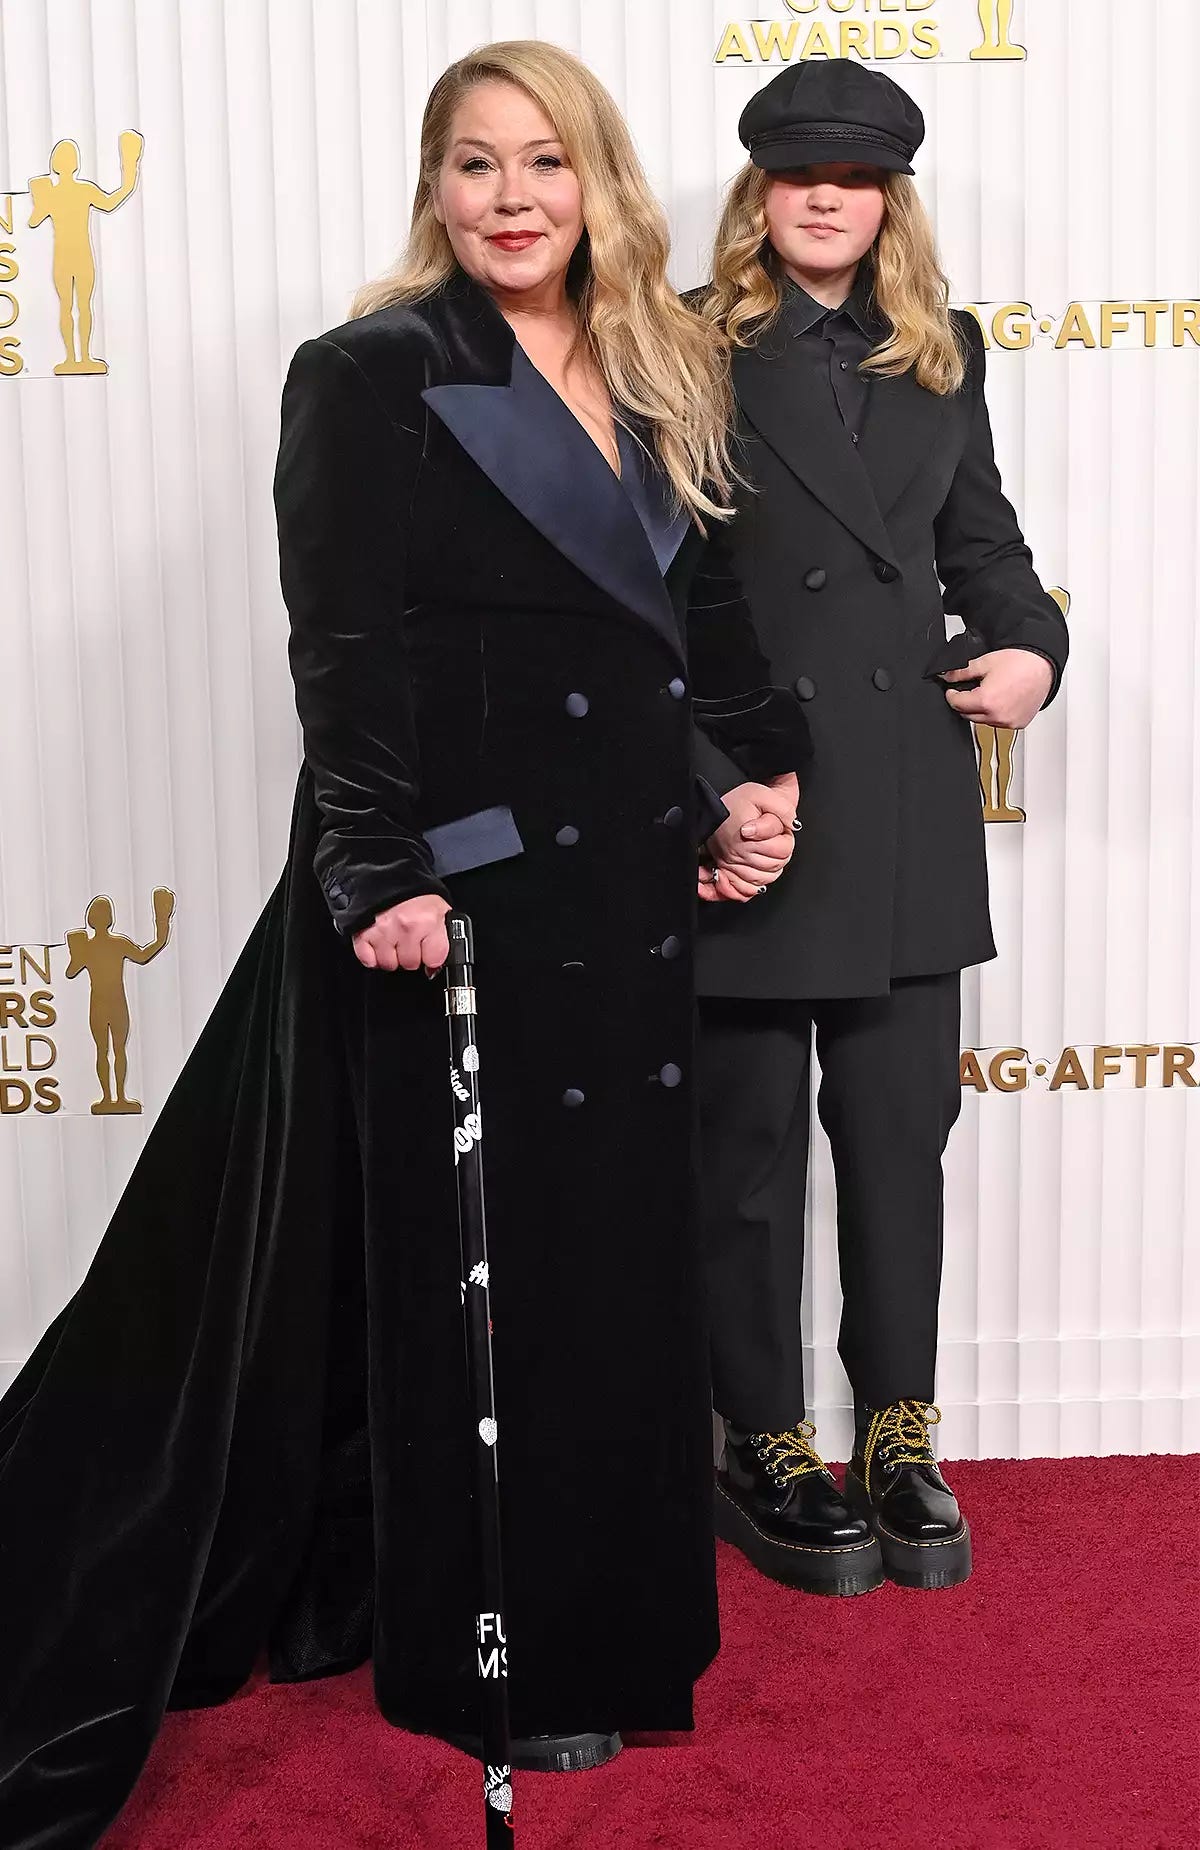 Christina Applegate on the SAG red carpet with her daughter; Christina has a black cane with various decorations on it, including a sticker that say FU MS